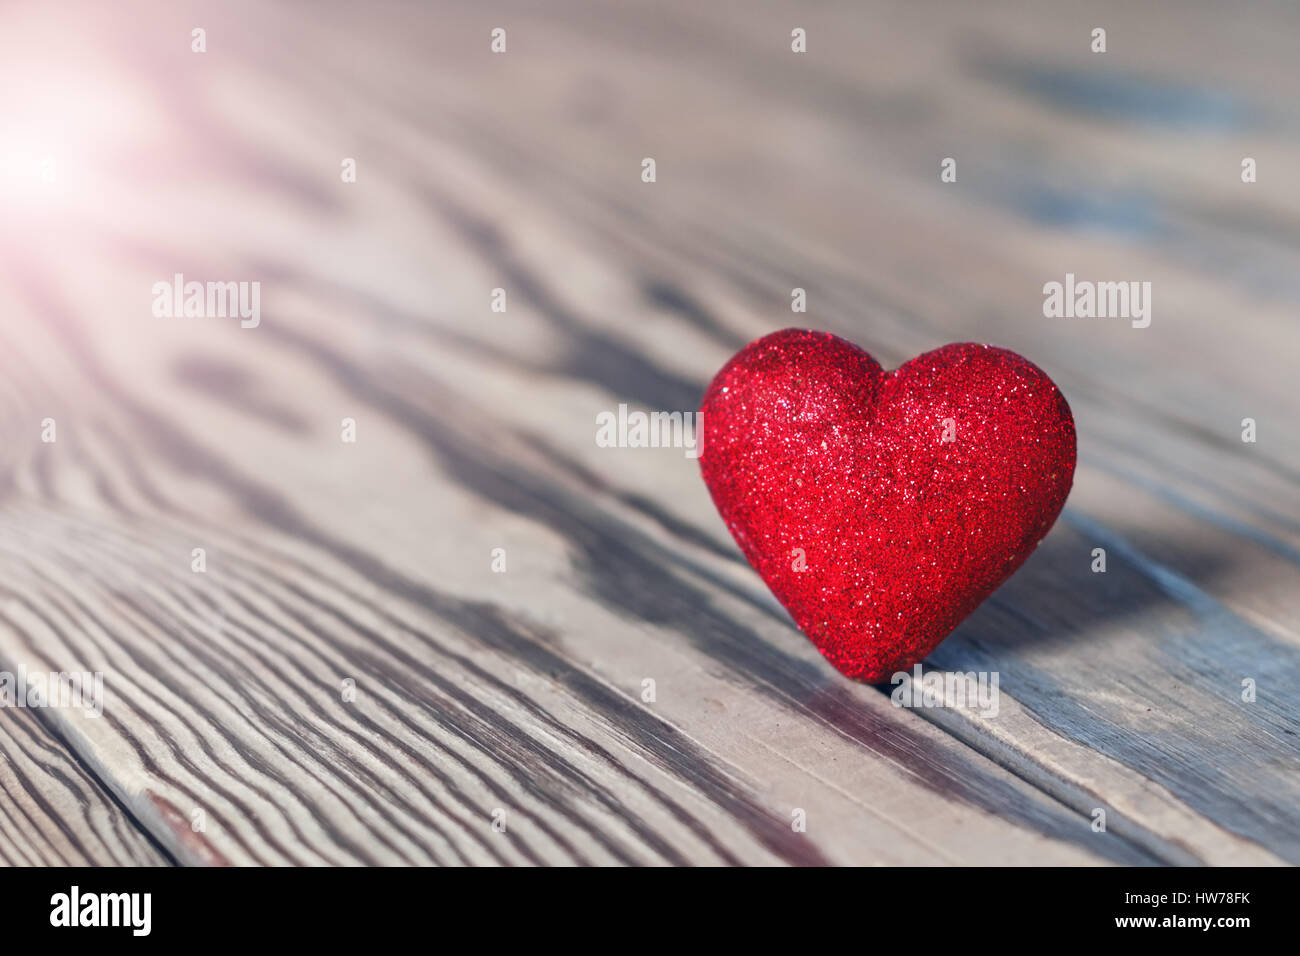 Red heart with glitter on wood. St. Valentine's Day. Shallow DOF, soft focus. With light effects. Stock Photo